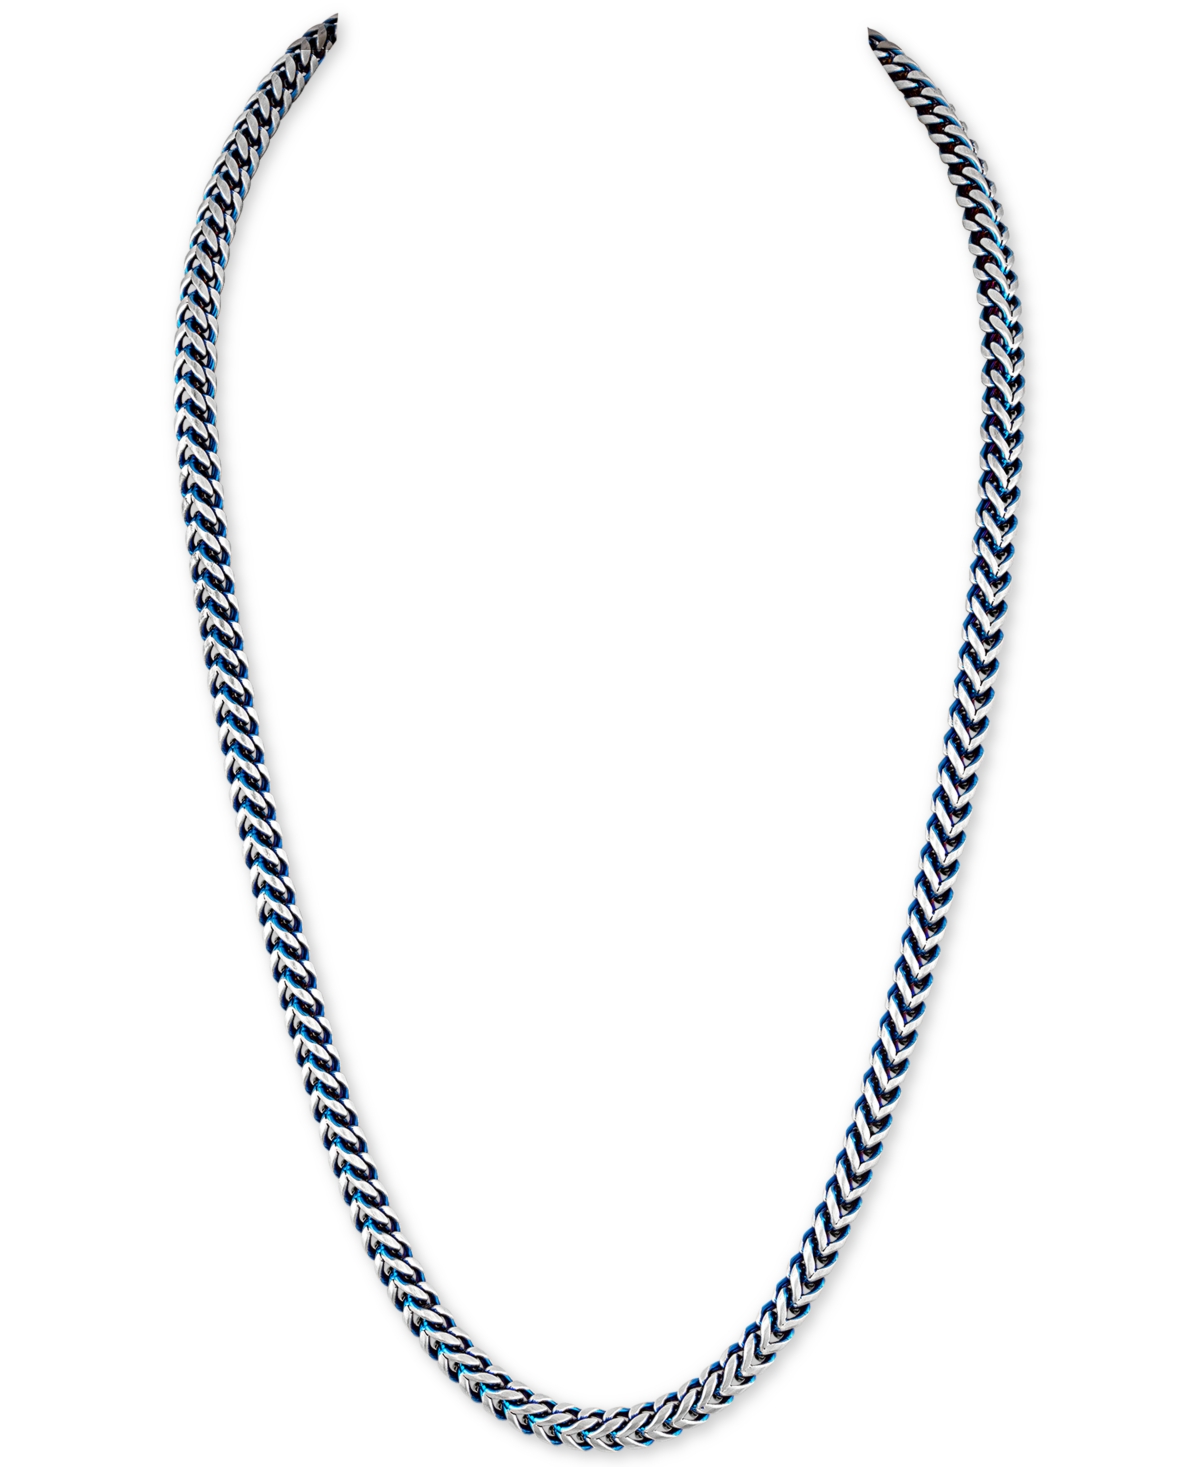 Fox Chain Necklace in Stainless Steel and Blue Ion-Plate, Created for Macy's - Silver